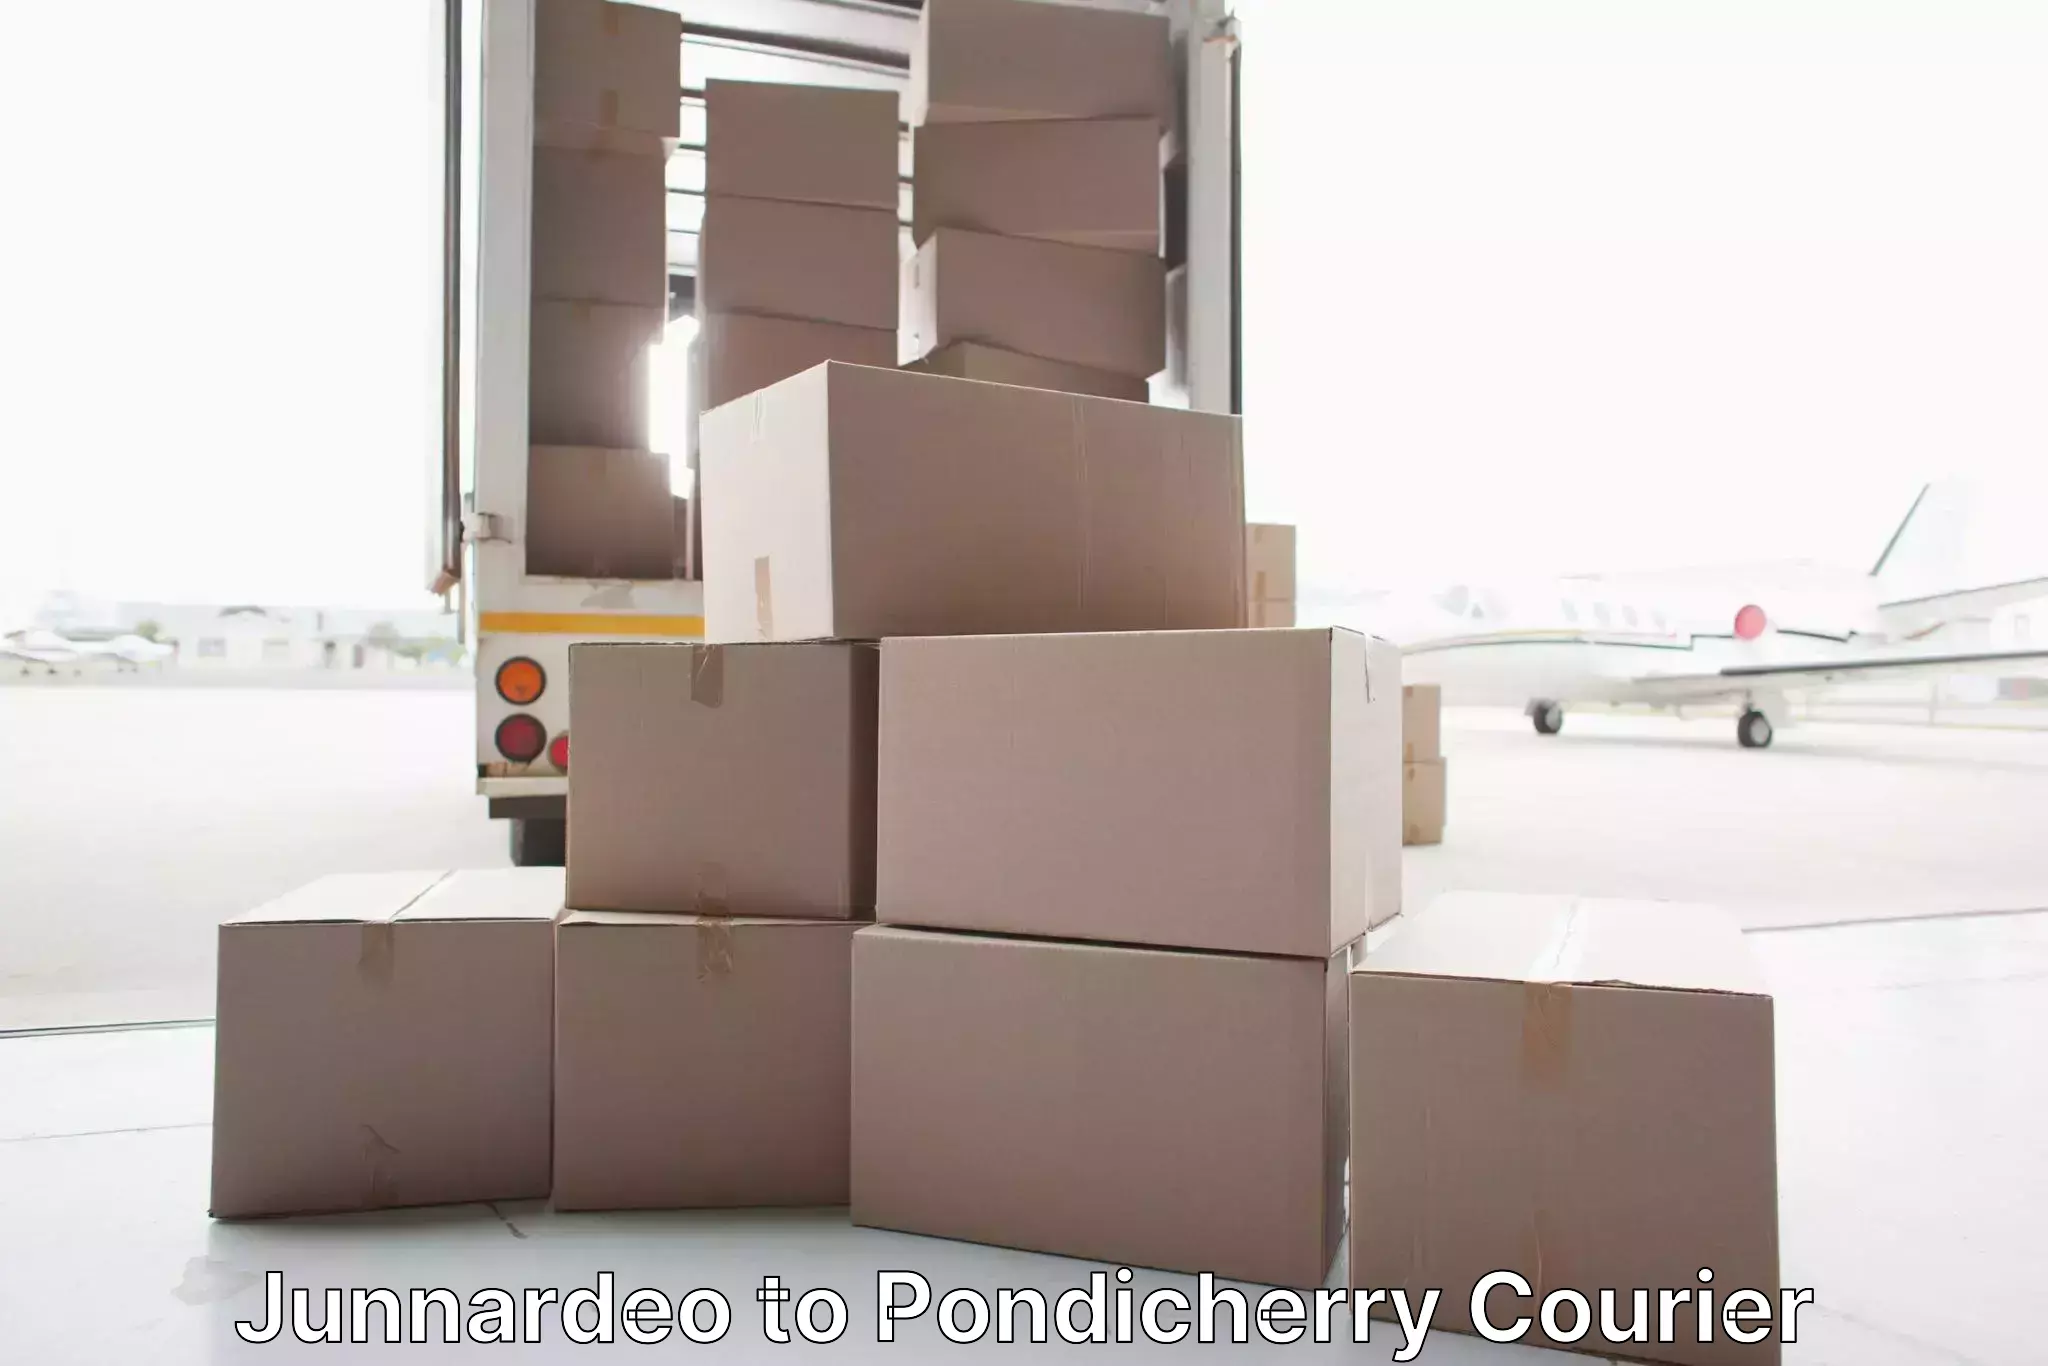 Home moving specialists Junnardeo to Pondicherry